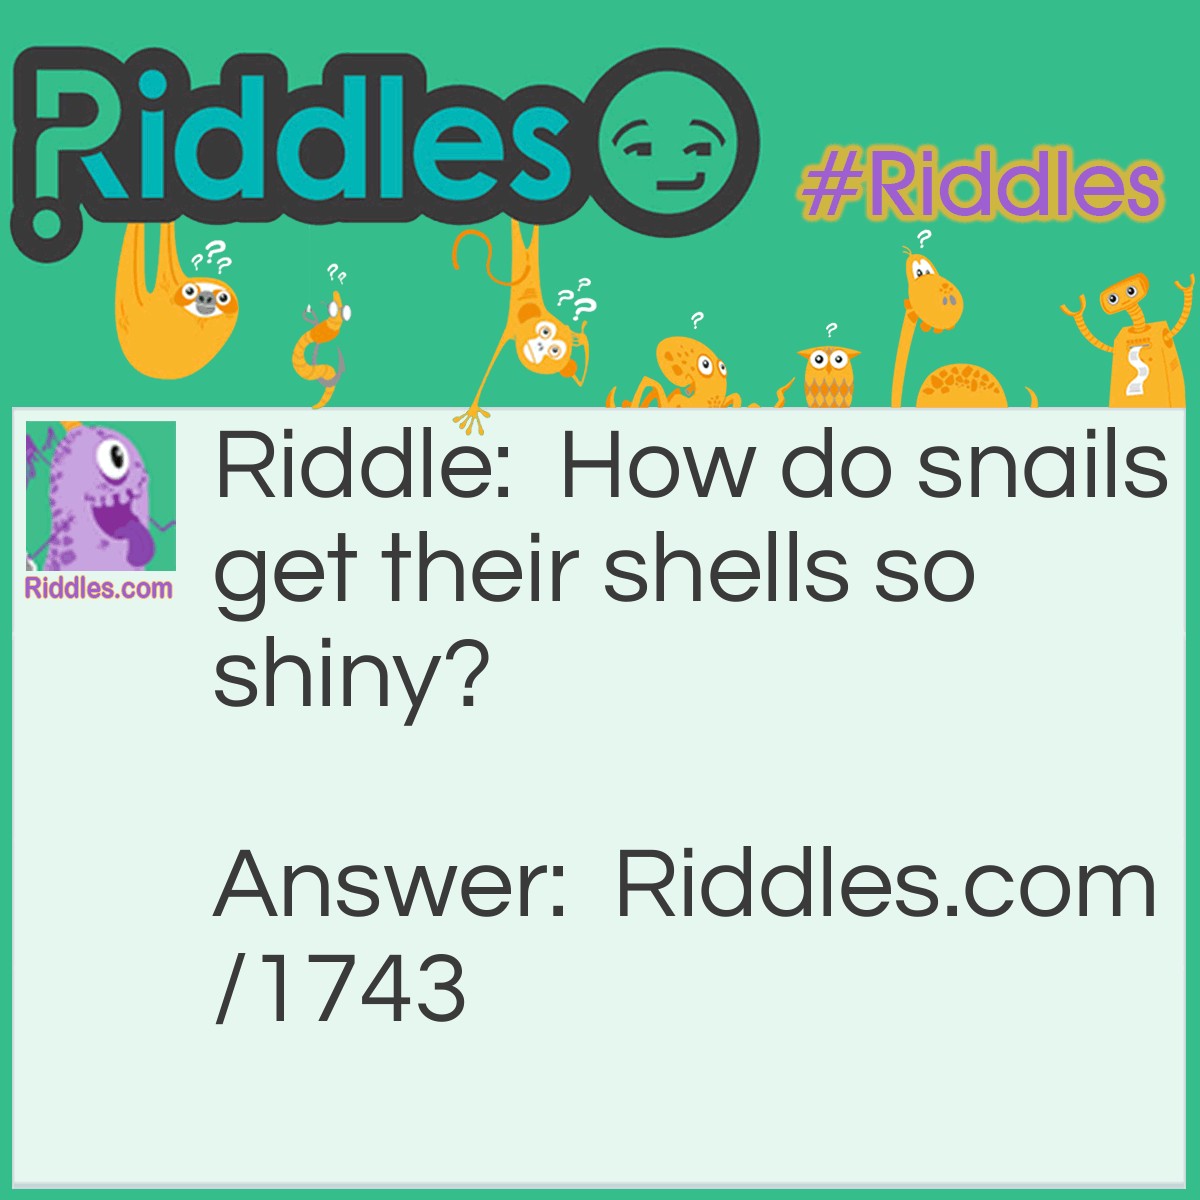 Riddle: How do snails get their shells so shiny? Answer: They use snail polish.